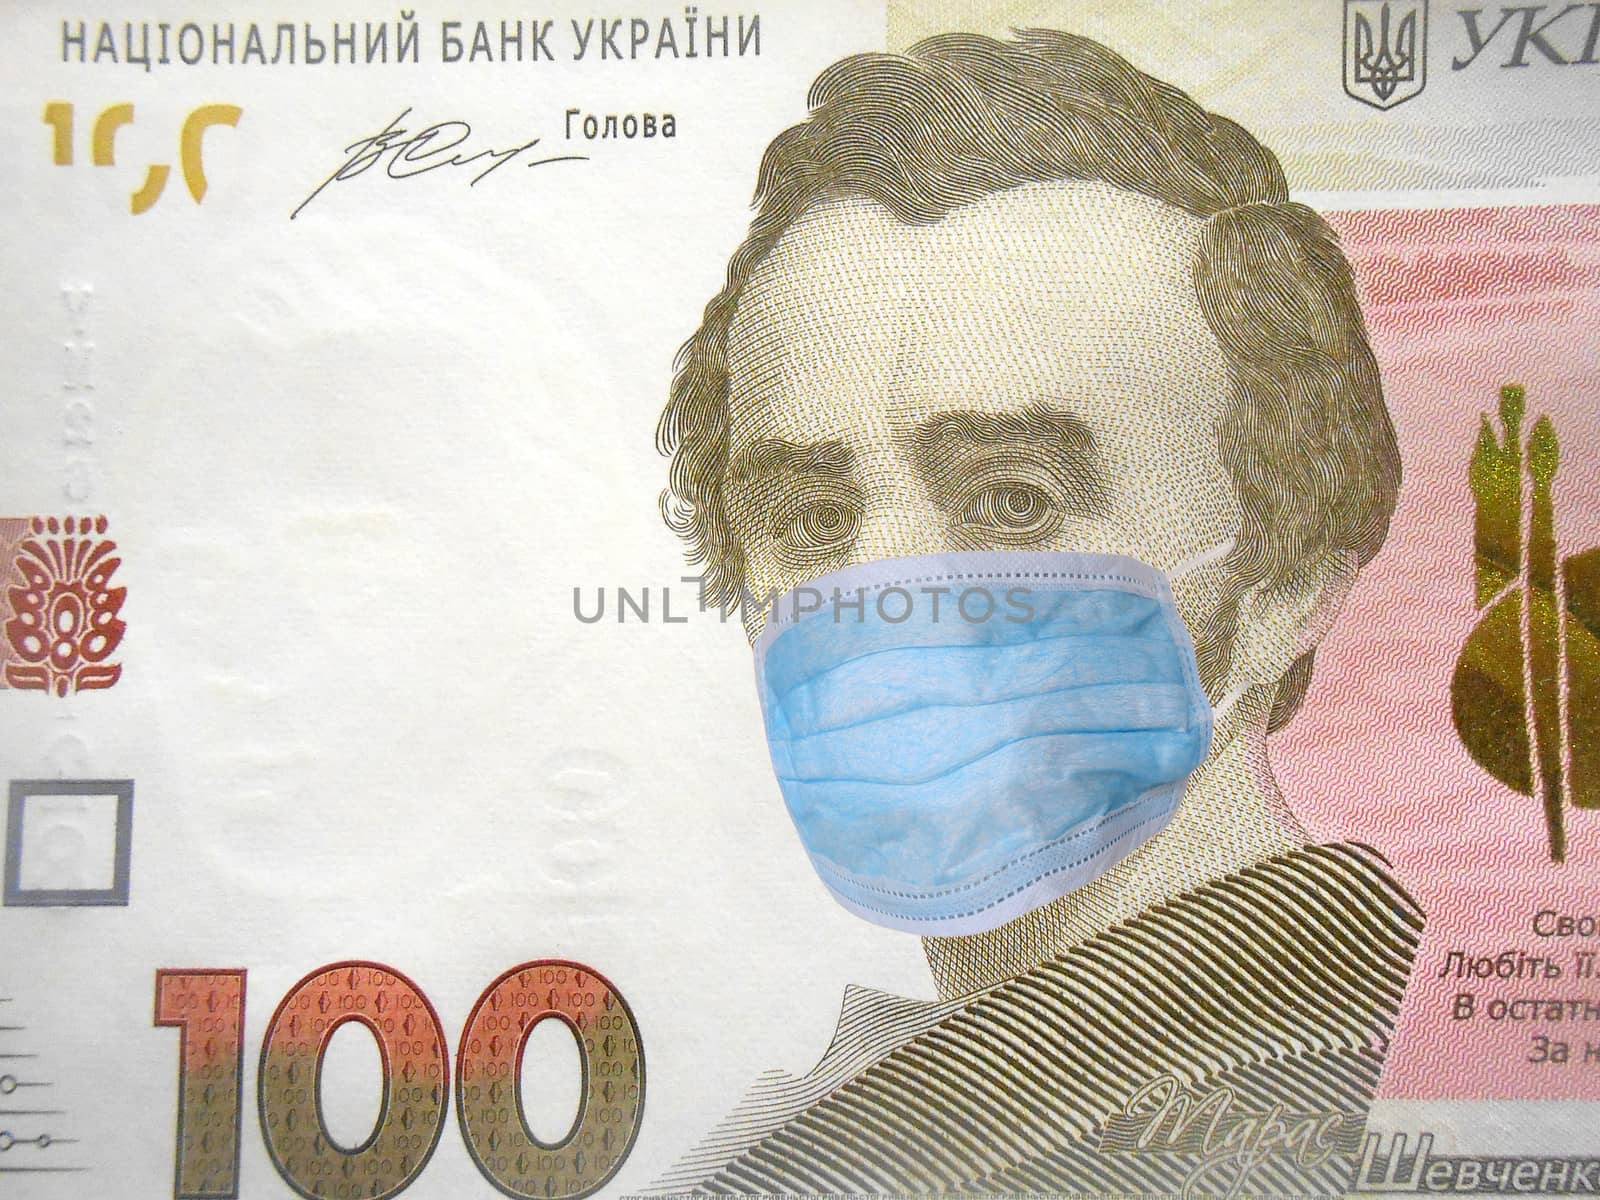 Coronavirus COVID-19 in Ukraine. 100 ukrainian money hryvnia money bill with face mask. World economy hit by corona virus outbreak and pandemic fears. Coronavirus affects global stock market. Finance and crisis concept. by fotoscool